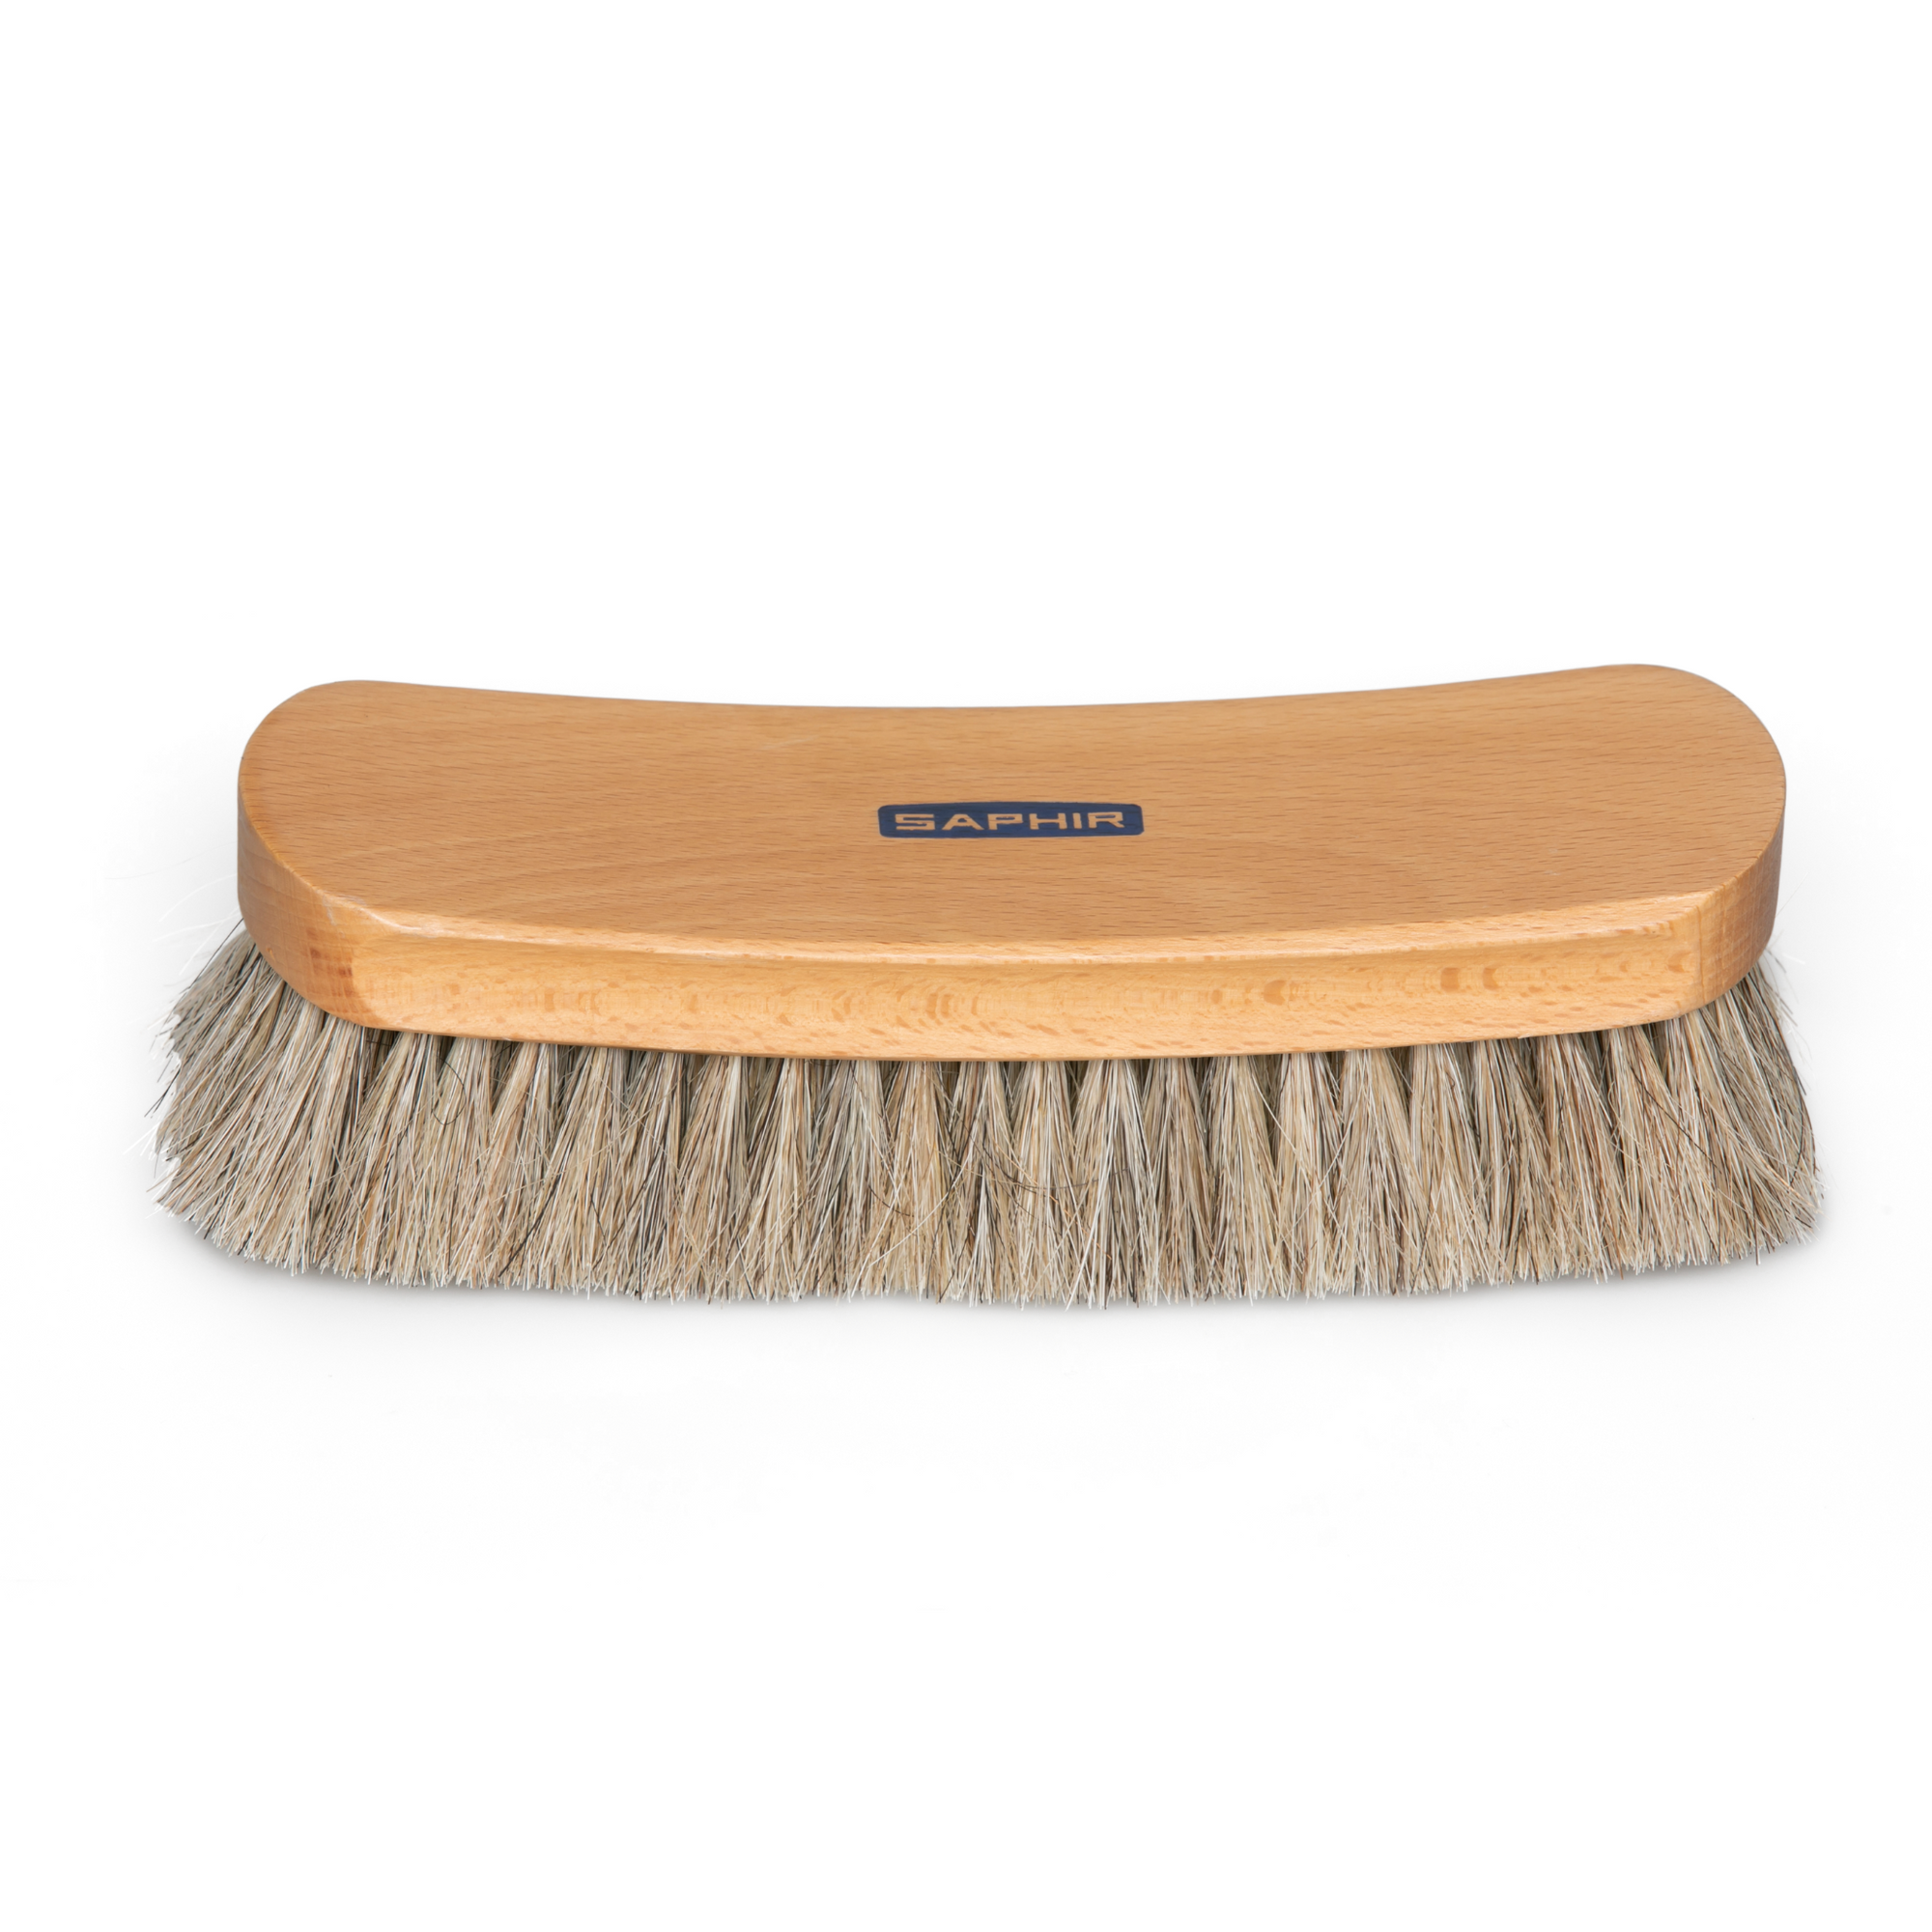 Saphir horse hair brush for leather shoe  care. Stocked by Little Lusso Australia